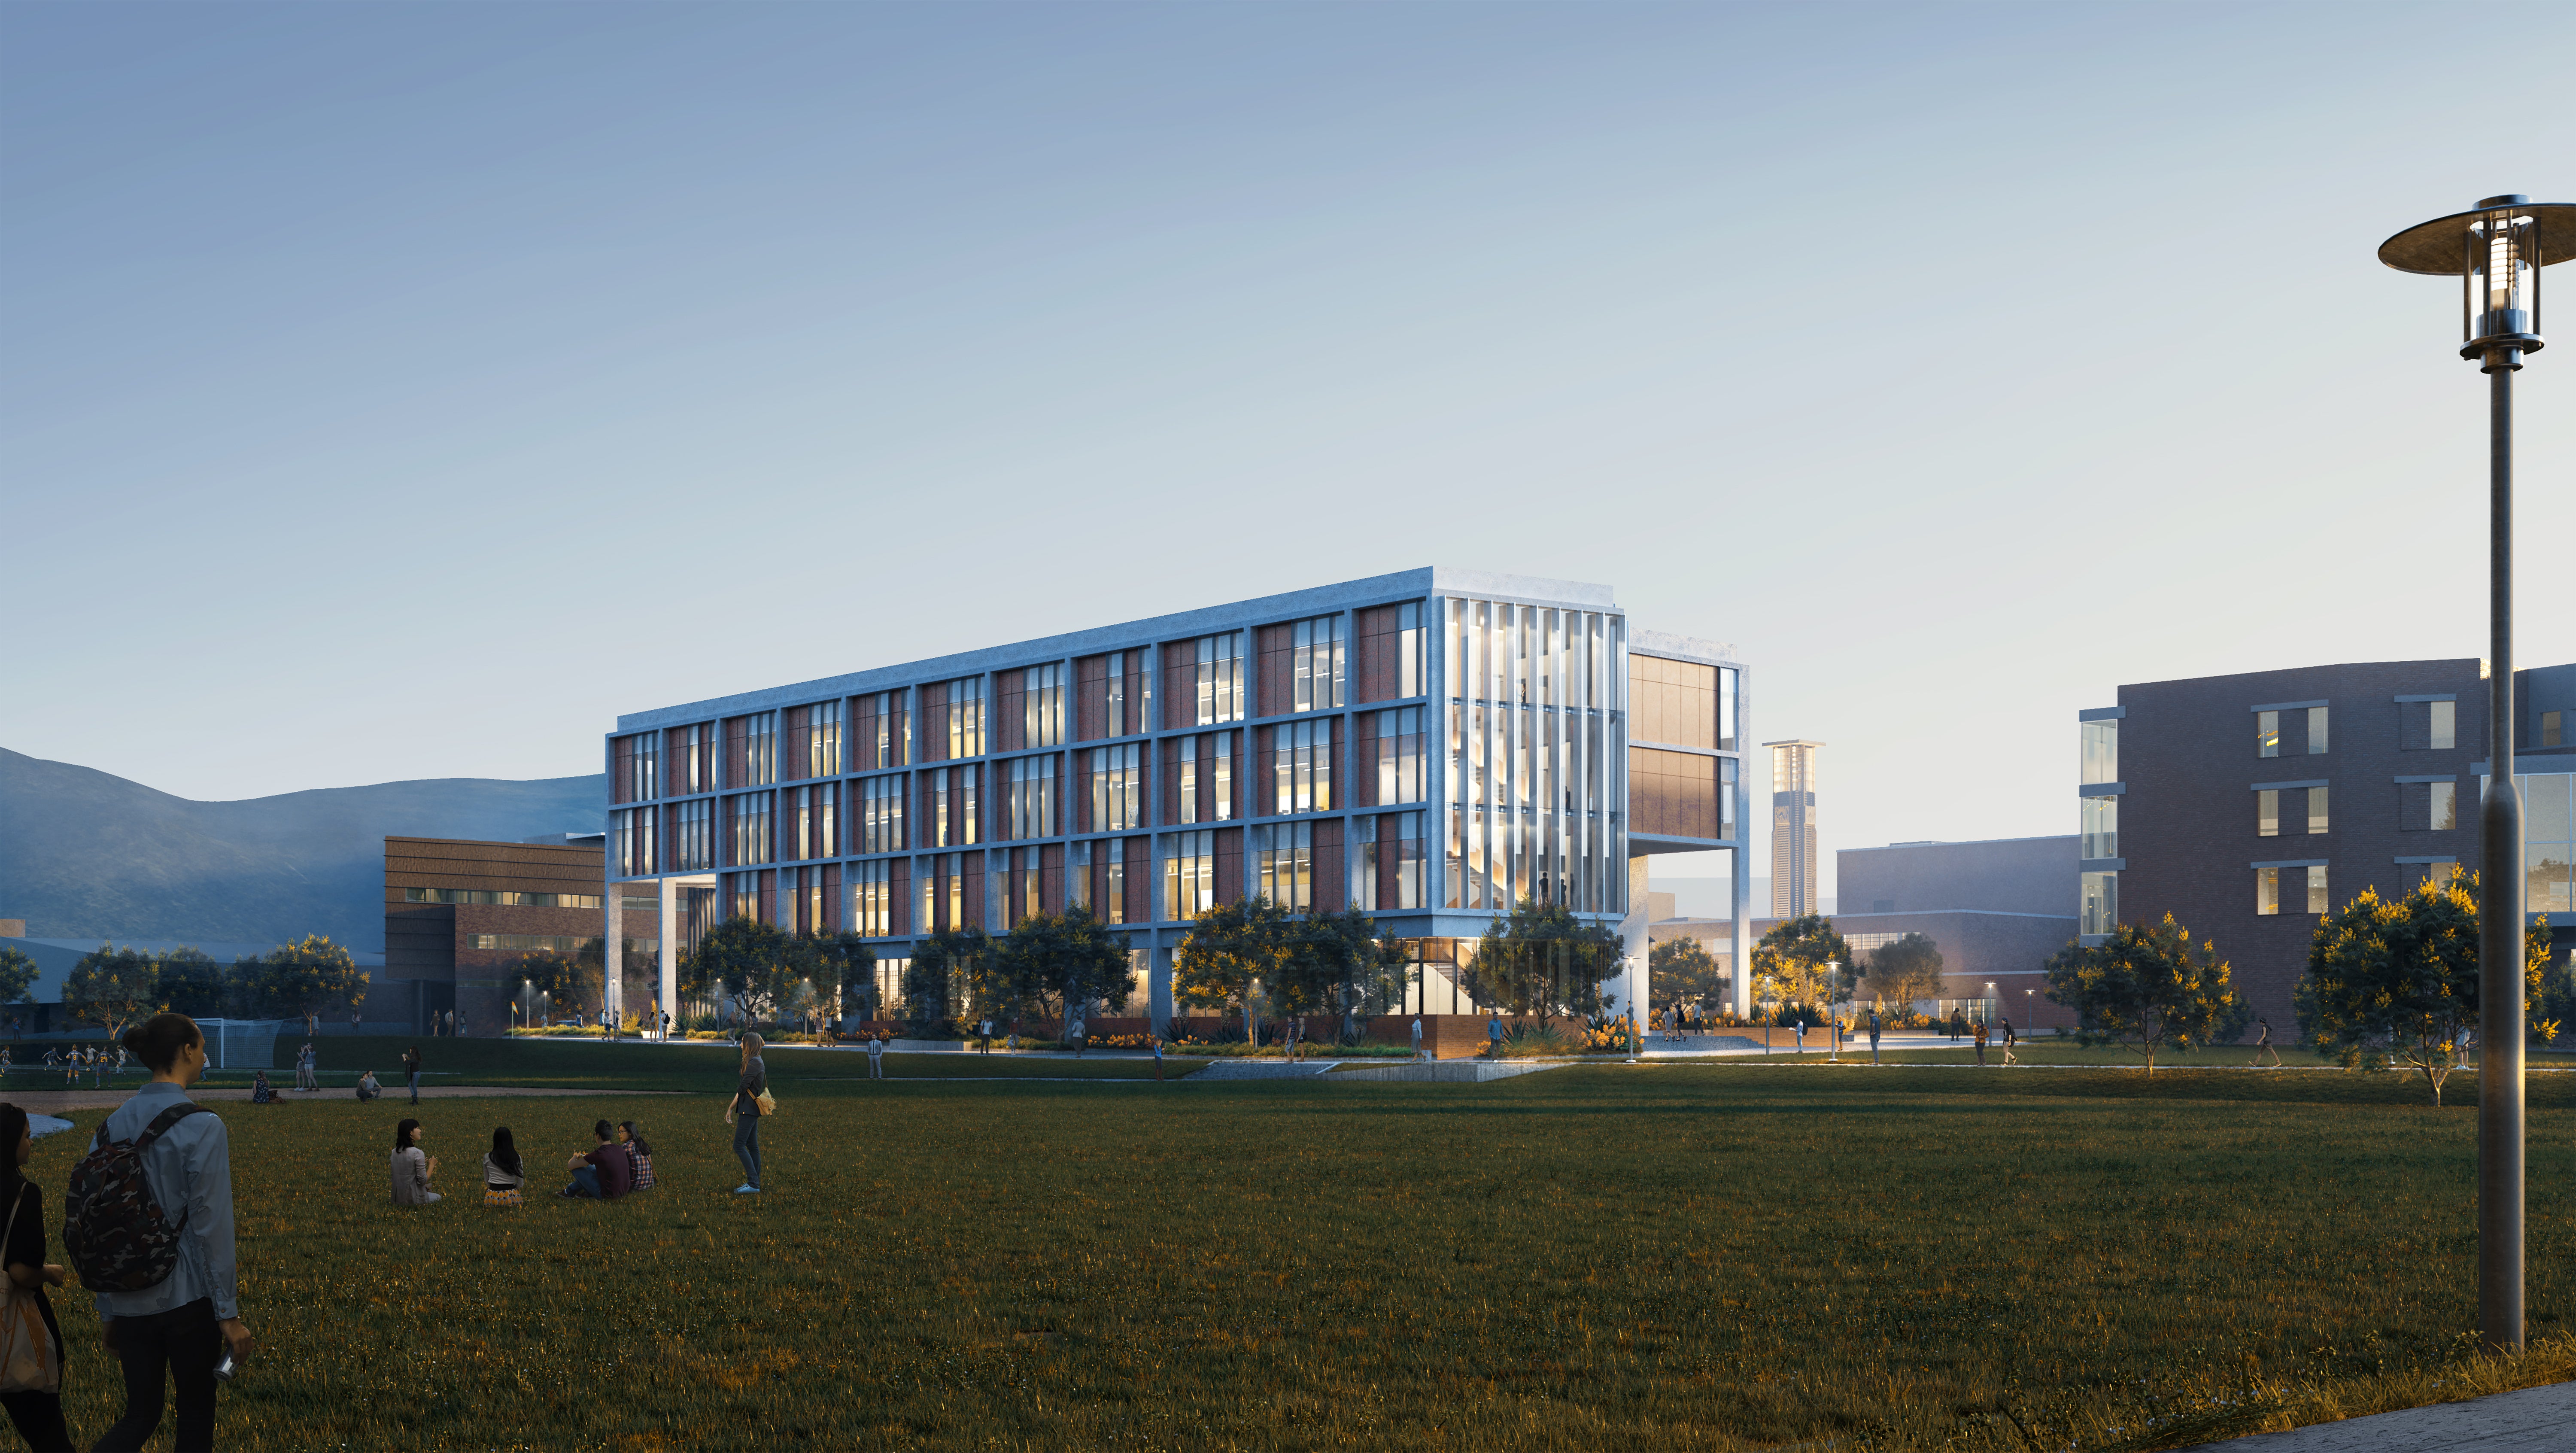 Rendering of the Undergraduate Teaching and Learning Facility (UTLF) 